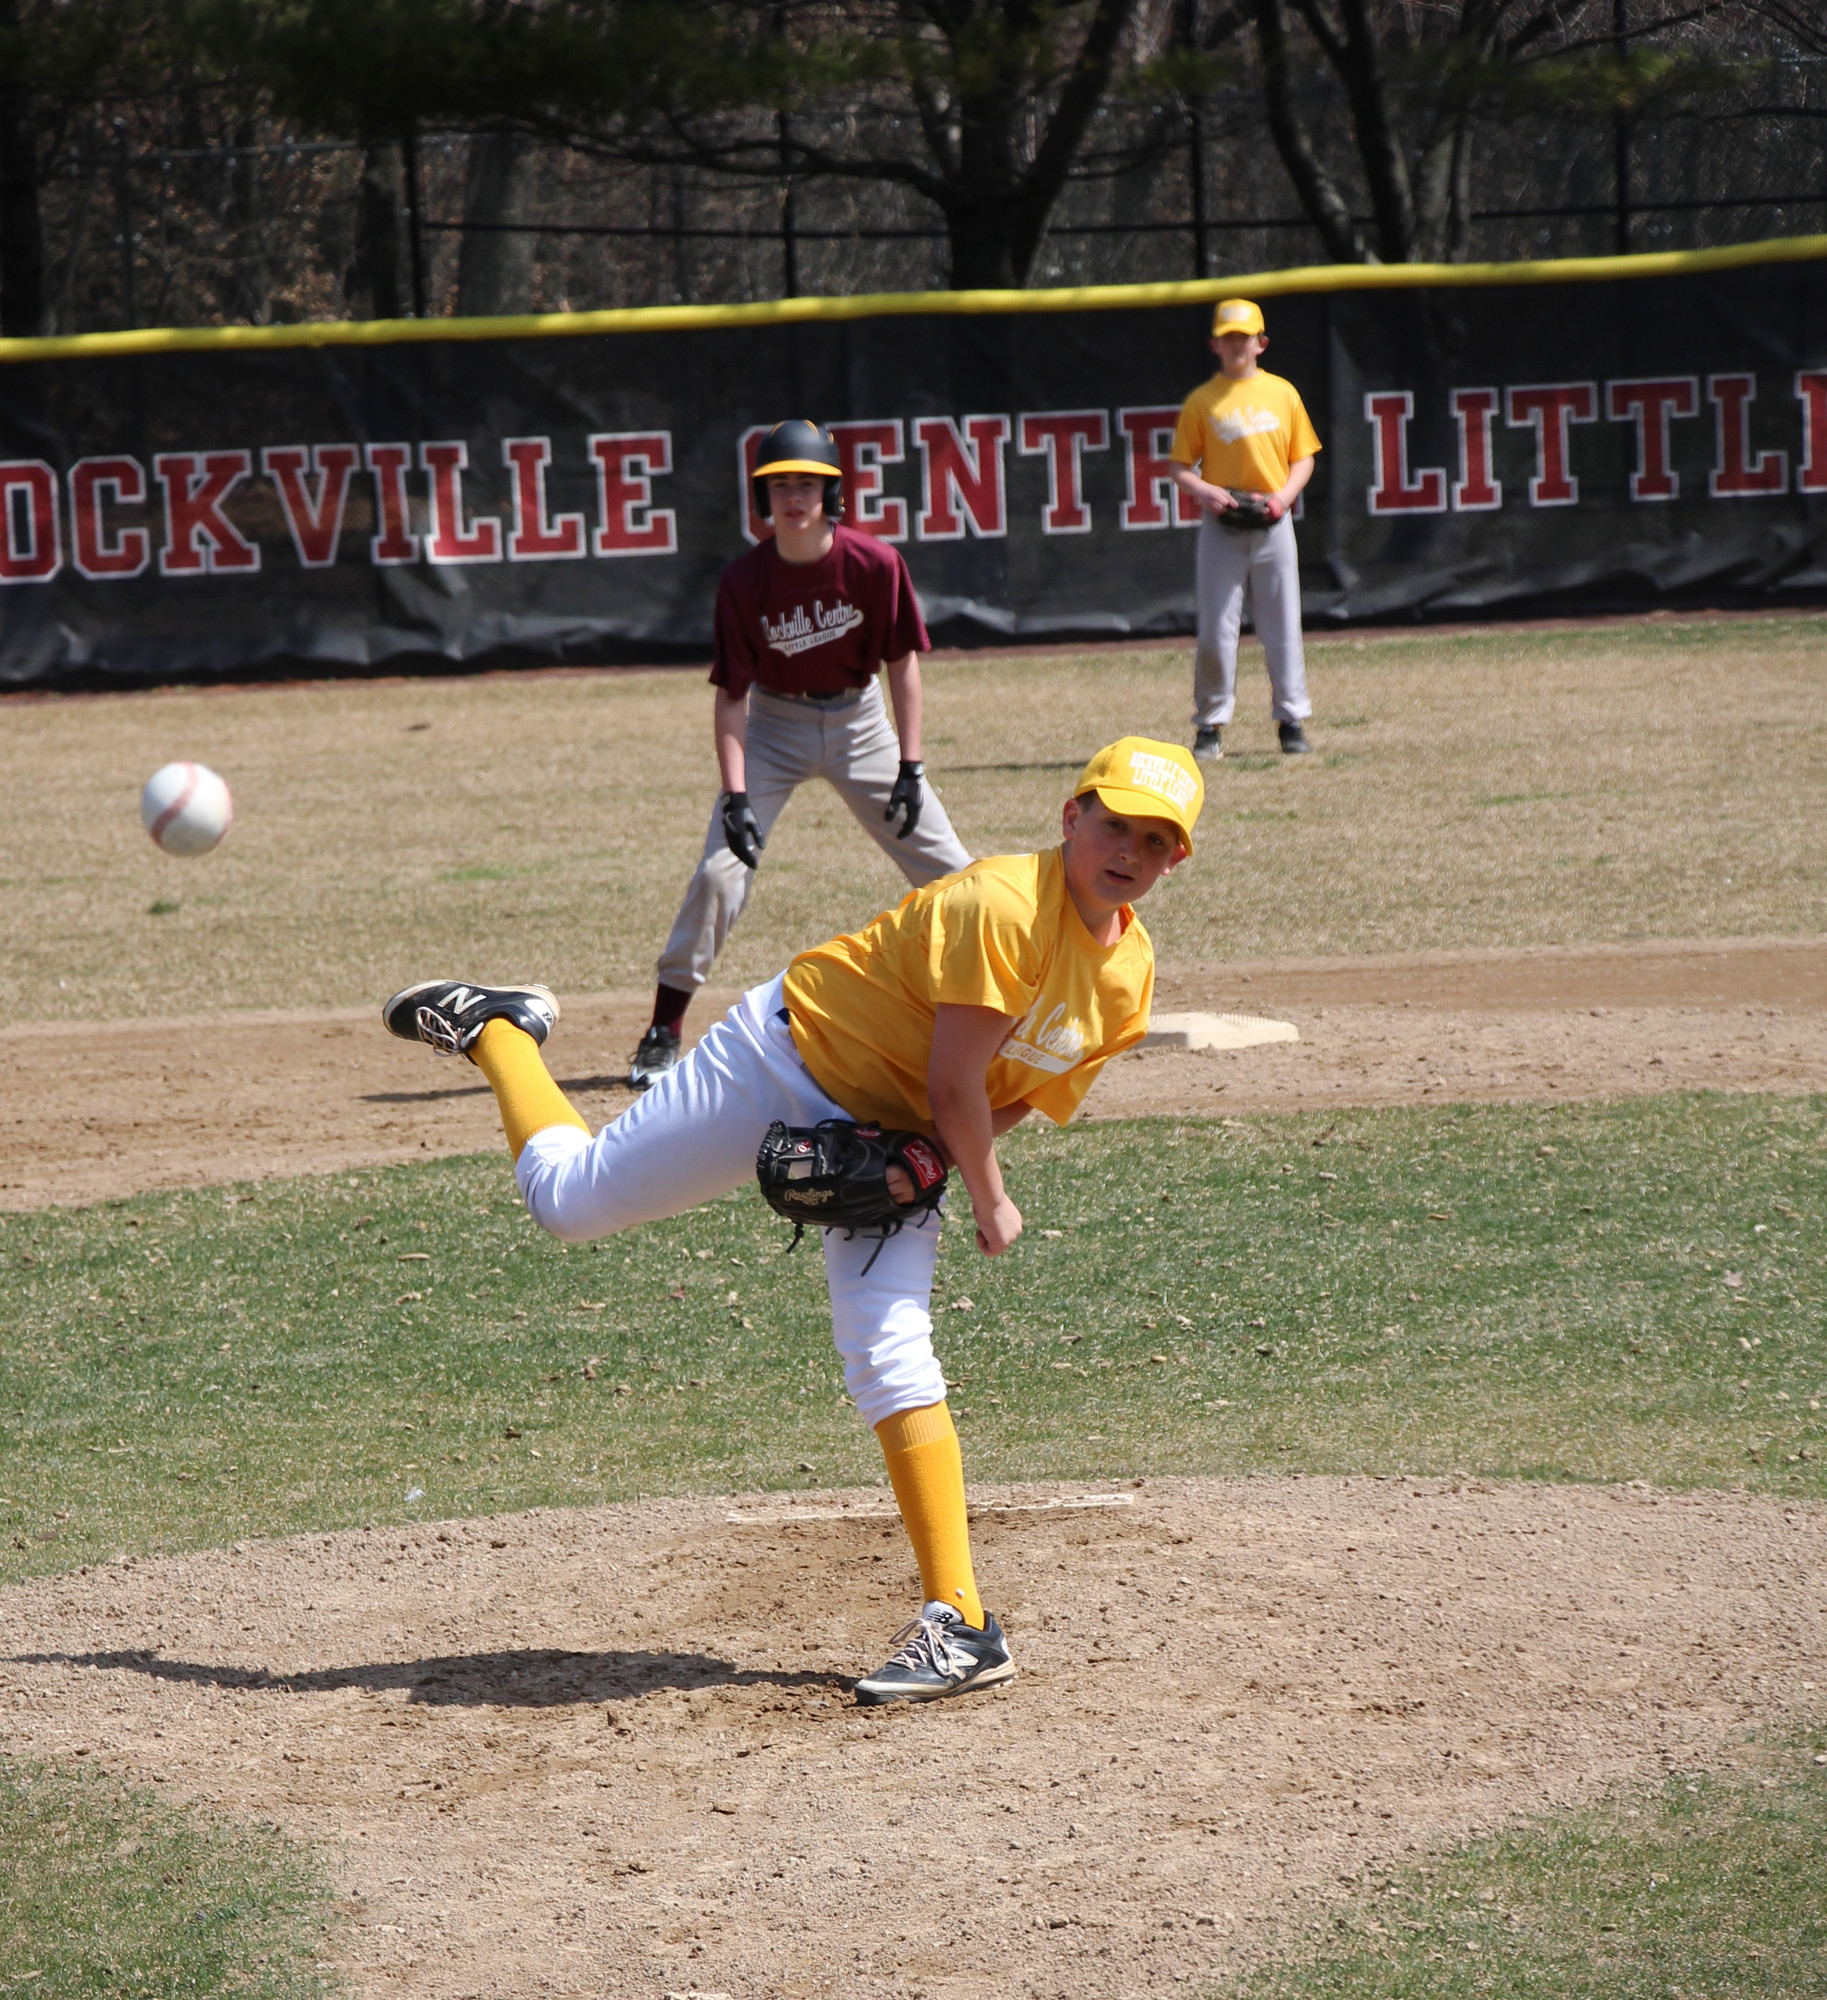 The Rockville Centre Little League kicked off its season last Saturday, holding games across the village. Above, Jake Murphy threw one of the first pitches of the new season.